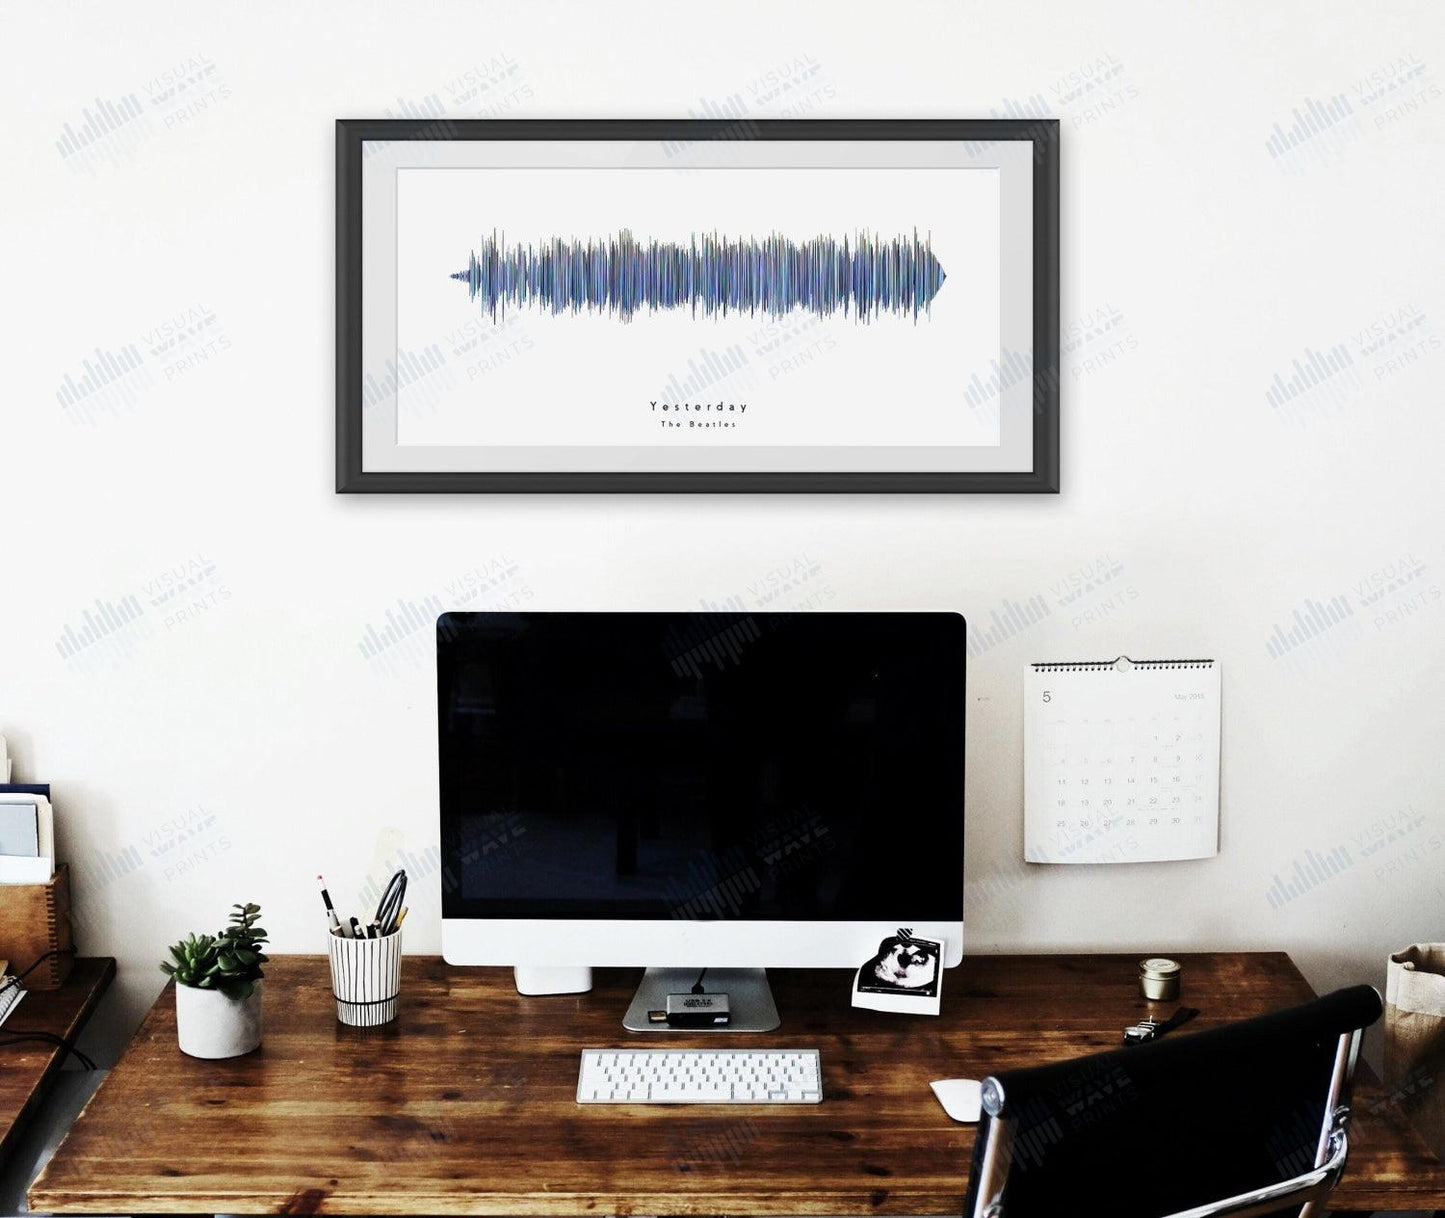 Yesterday by The Beatles - Visual Wave Prints